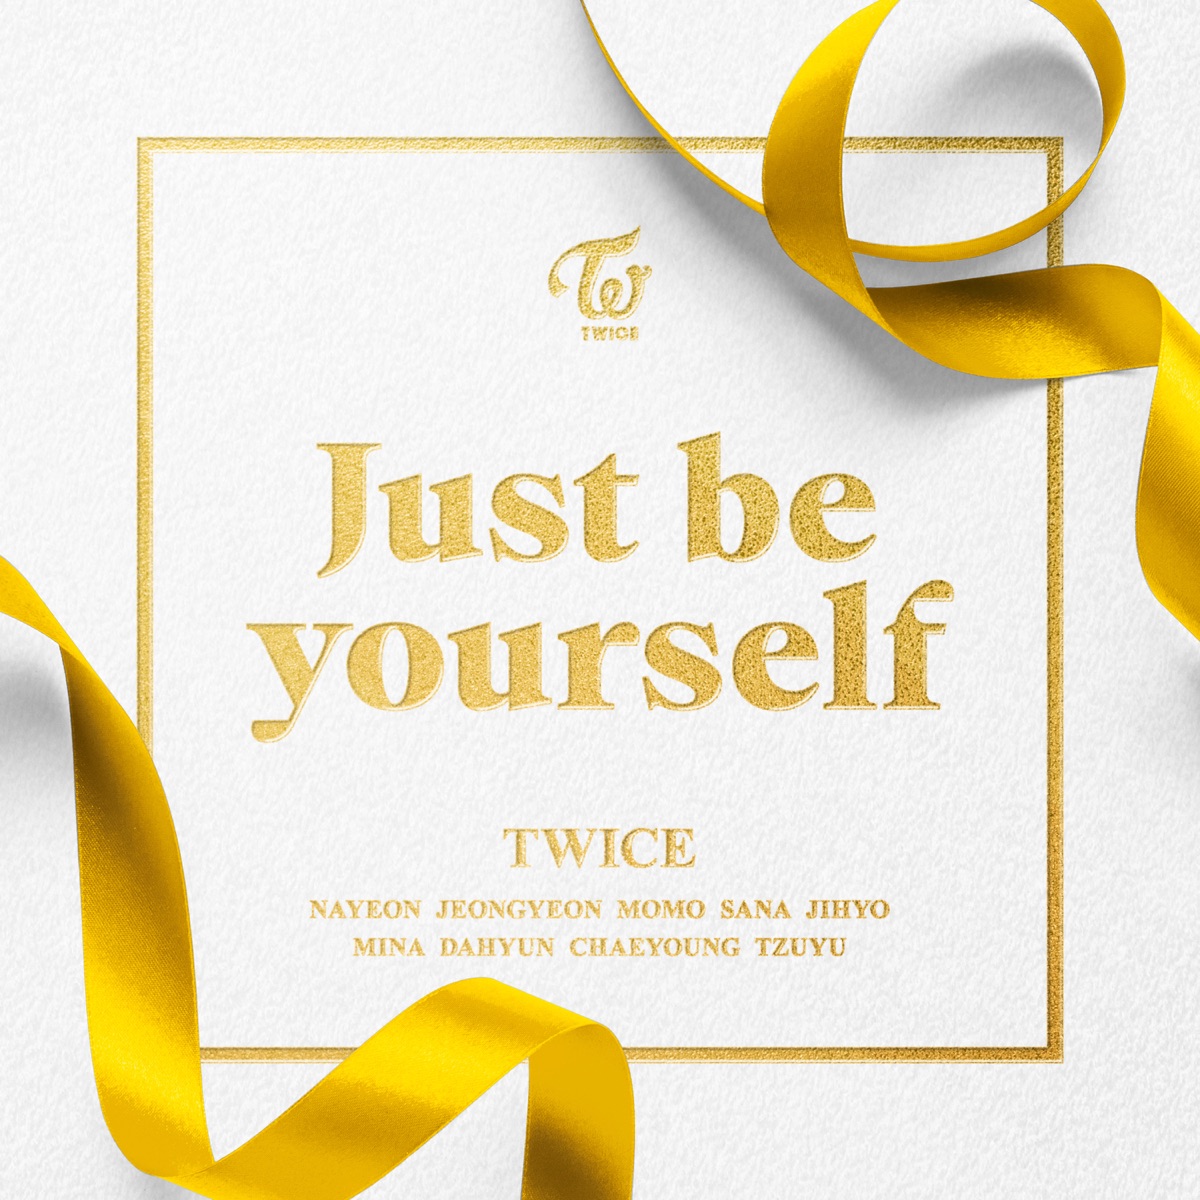 『TWICE - Just be yourself 歌詞』収録の『Just be yourself』ジャケット